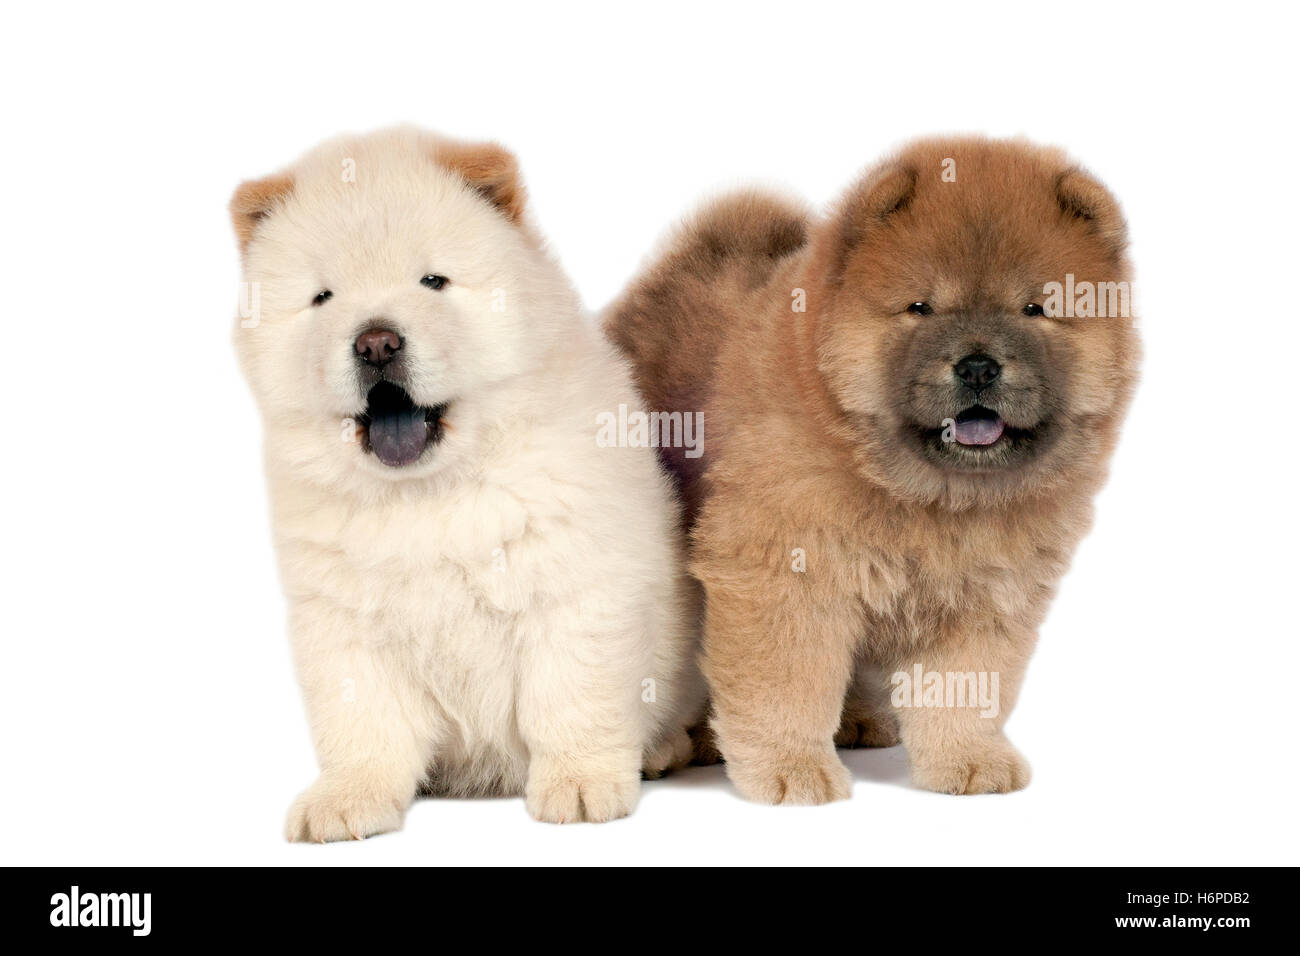 animal pet mammal brown brownish brunette fur dog studio puppy china cub baby breed homey domestic canine fluffy purebred Stock Photo